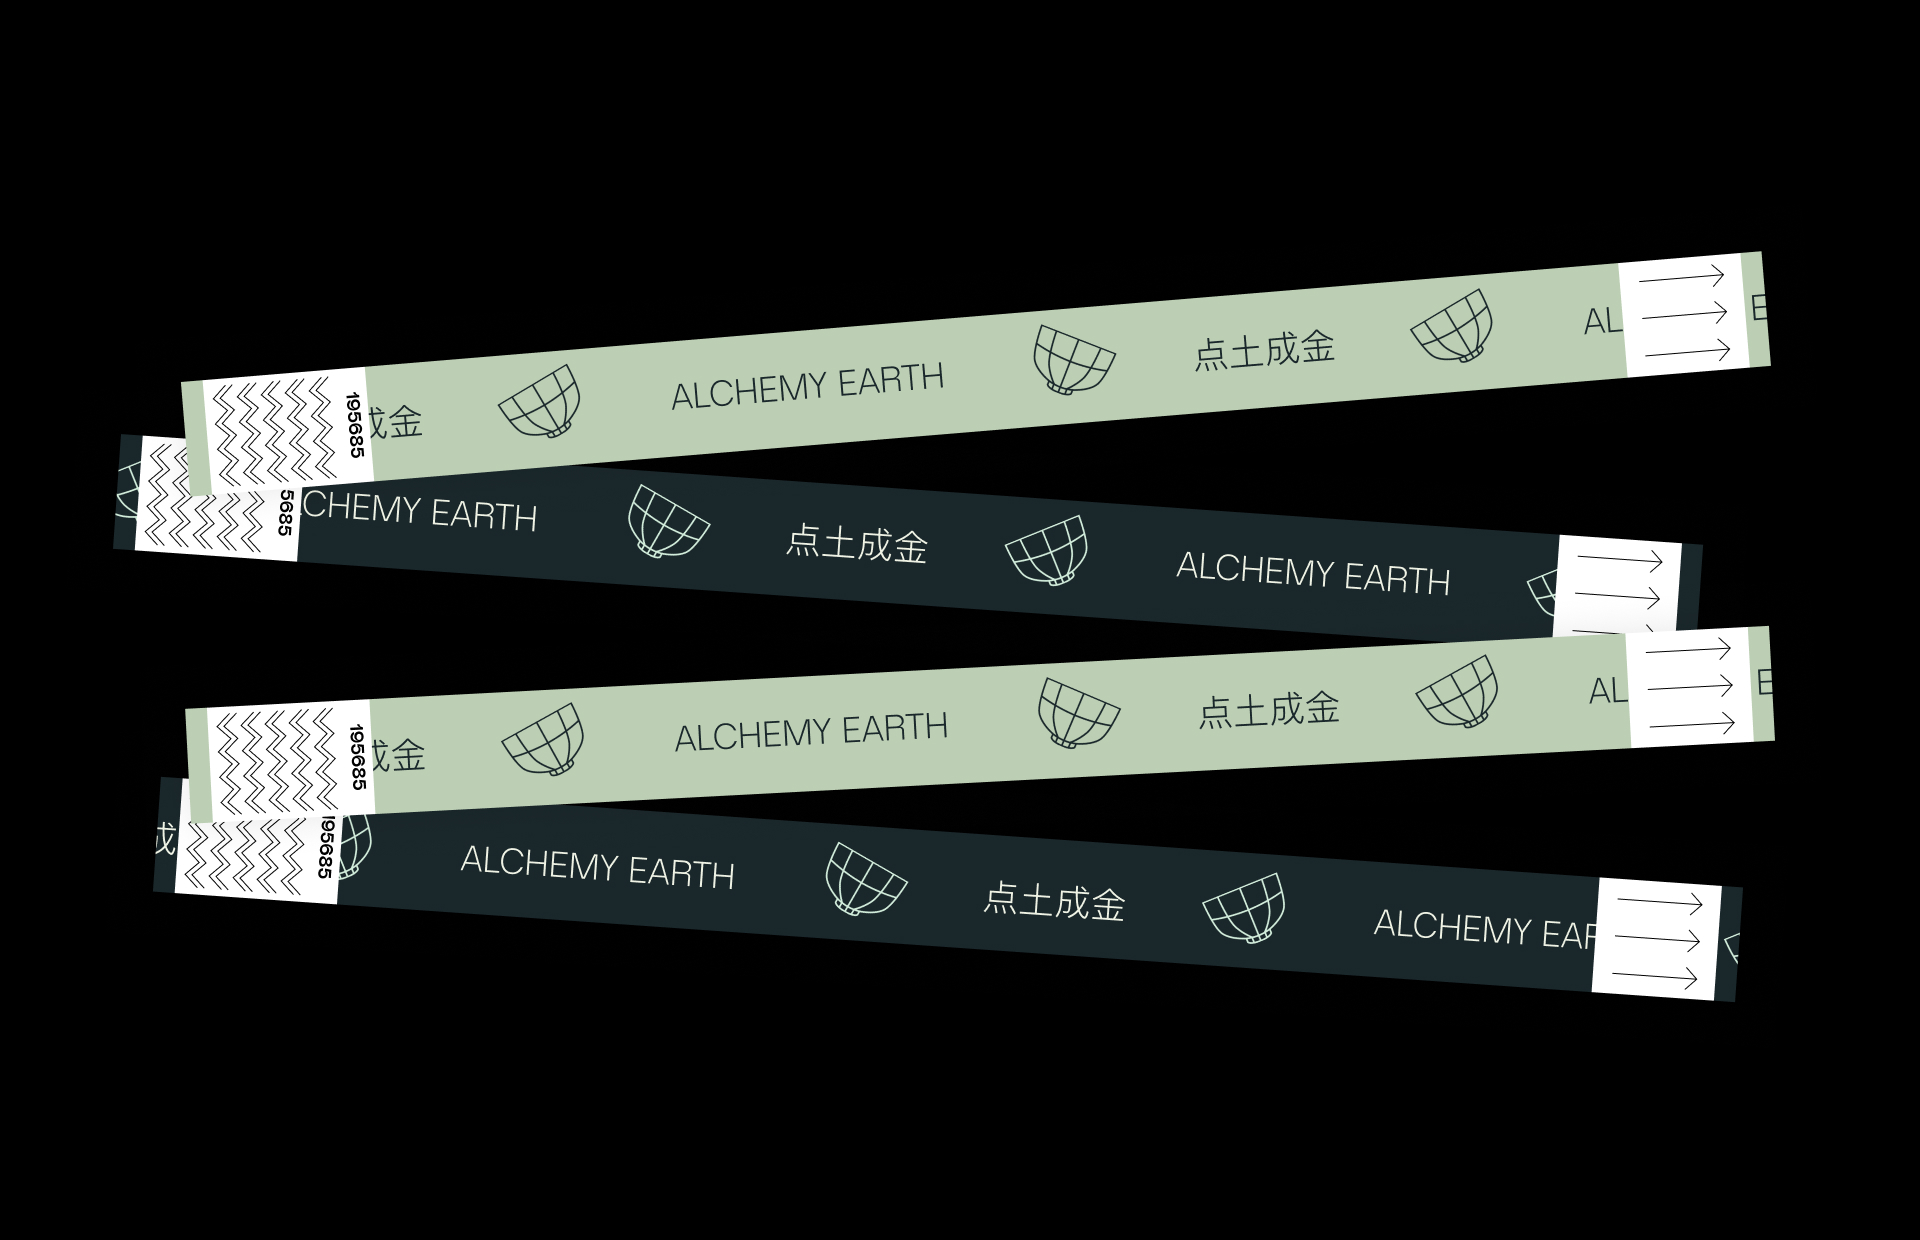 Ticket wristbands for Alchemy Earth